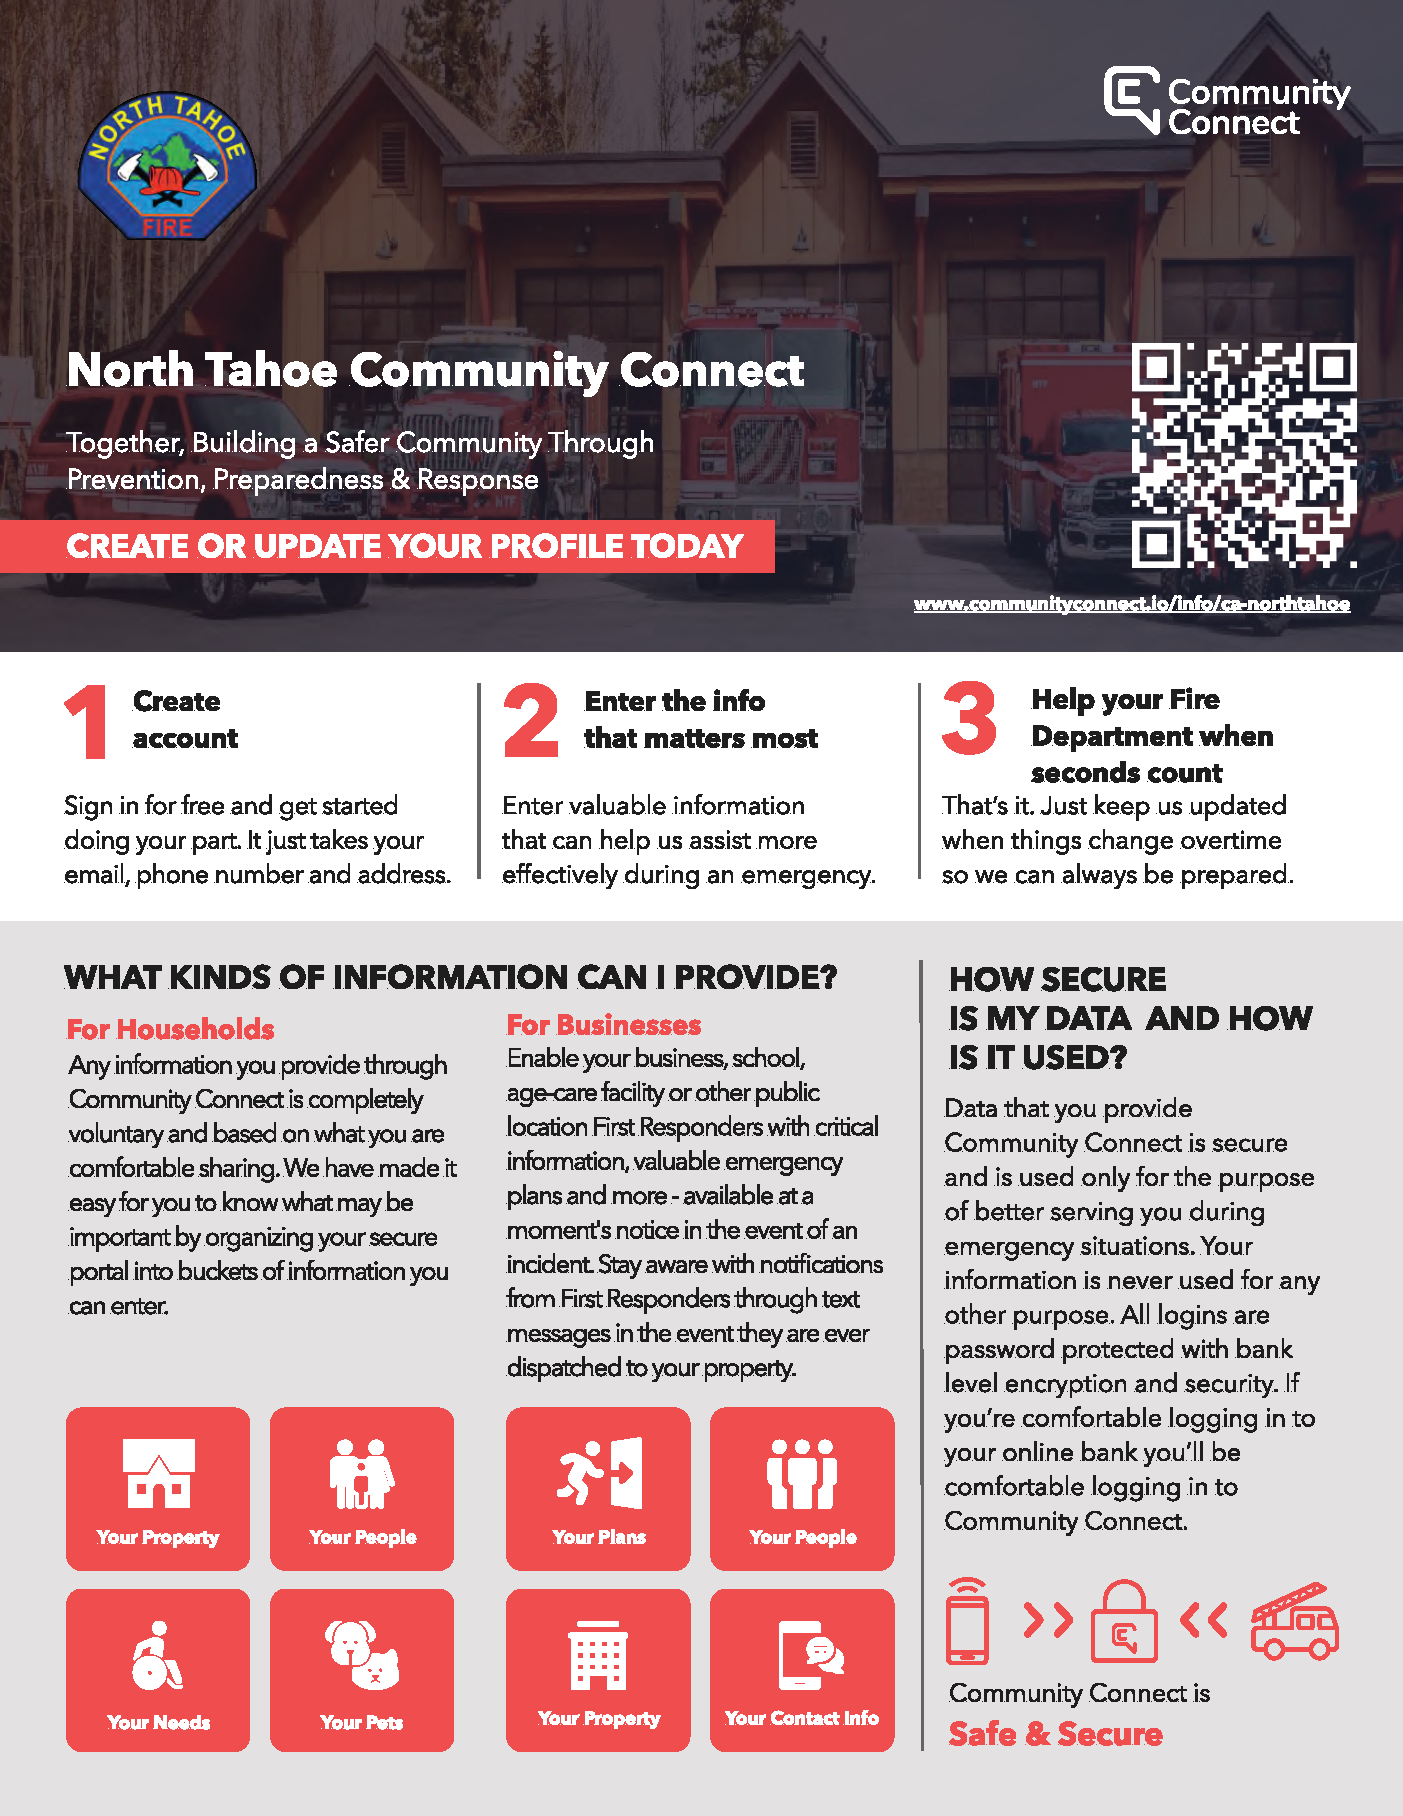 Community Connect Flyer. To learn more visit https://www.communityconnect.io/info/ca-northtahoe